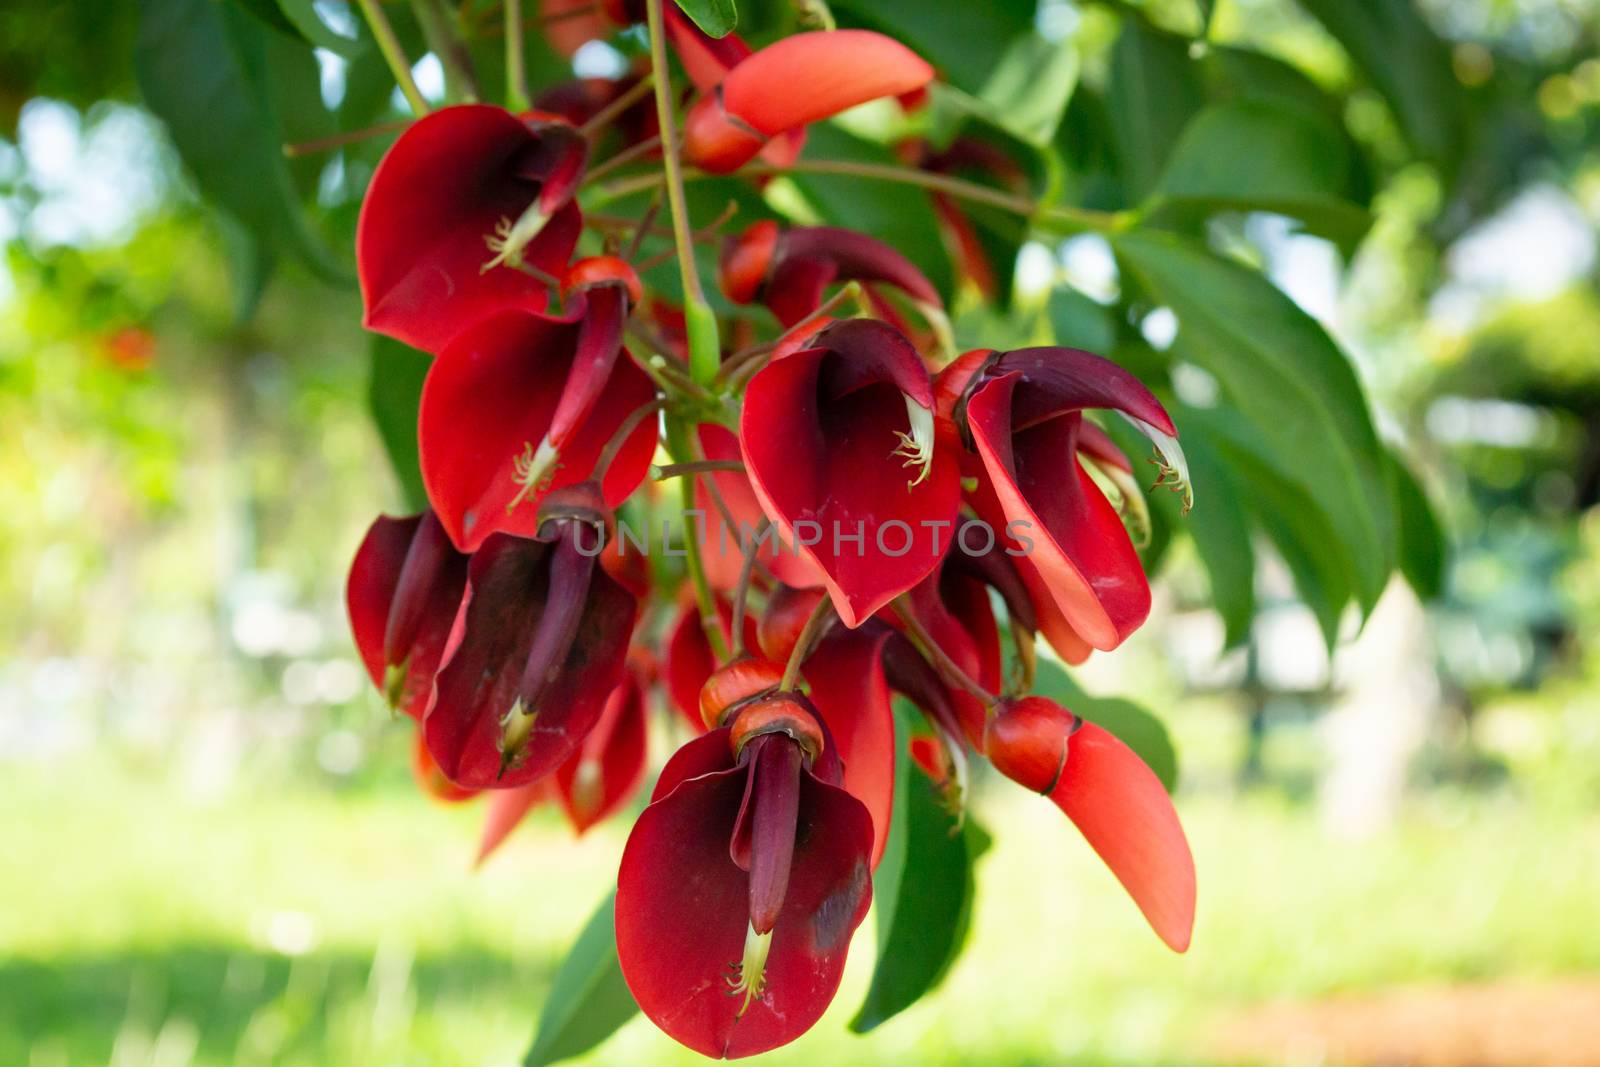 Close up of a tree with red flowers - erythrina crista-galli also known as  a coral tree and a flame tree. Stock image.